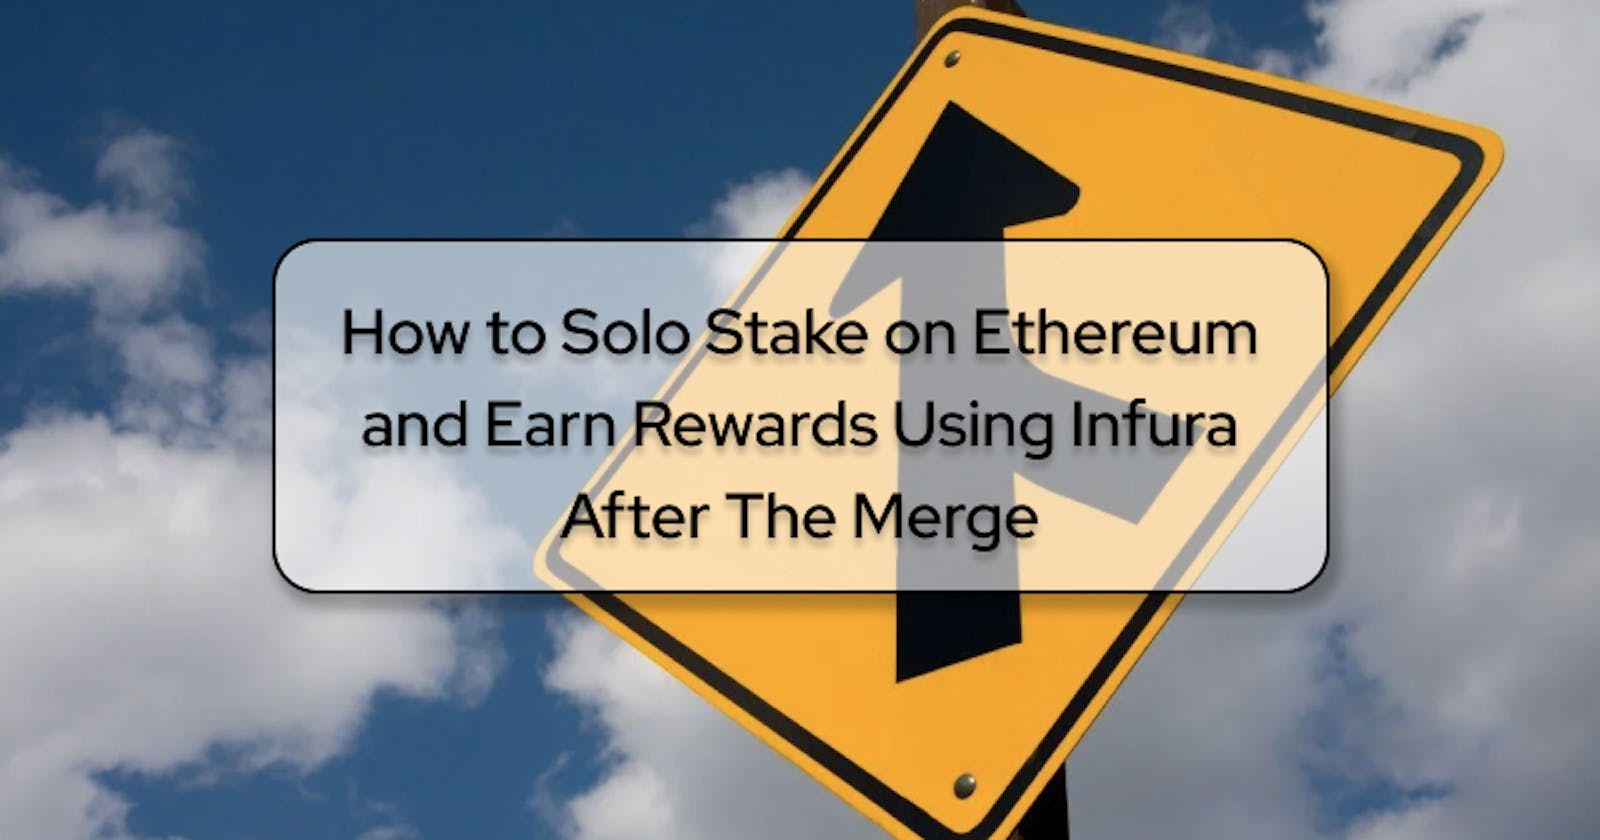 How to Solo Stake on Ethereum and Earn Rewards Using Infura After The Merge